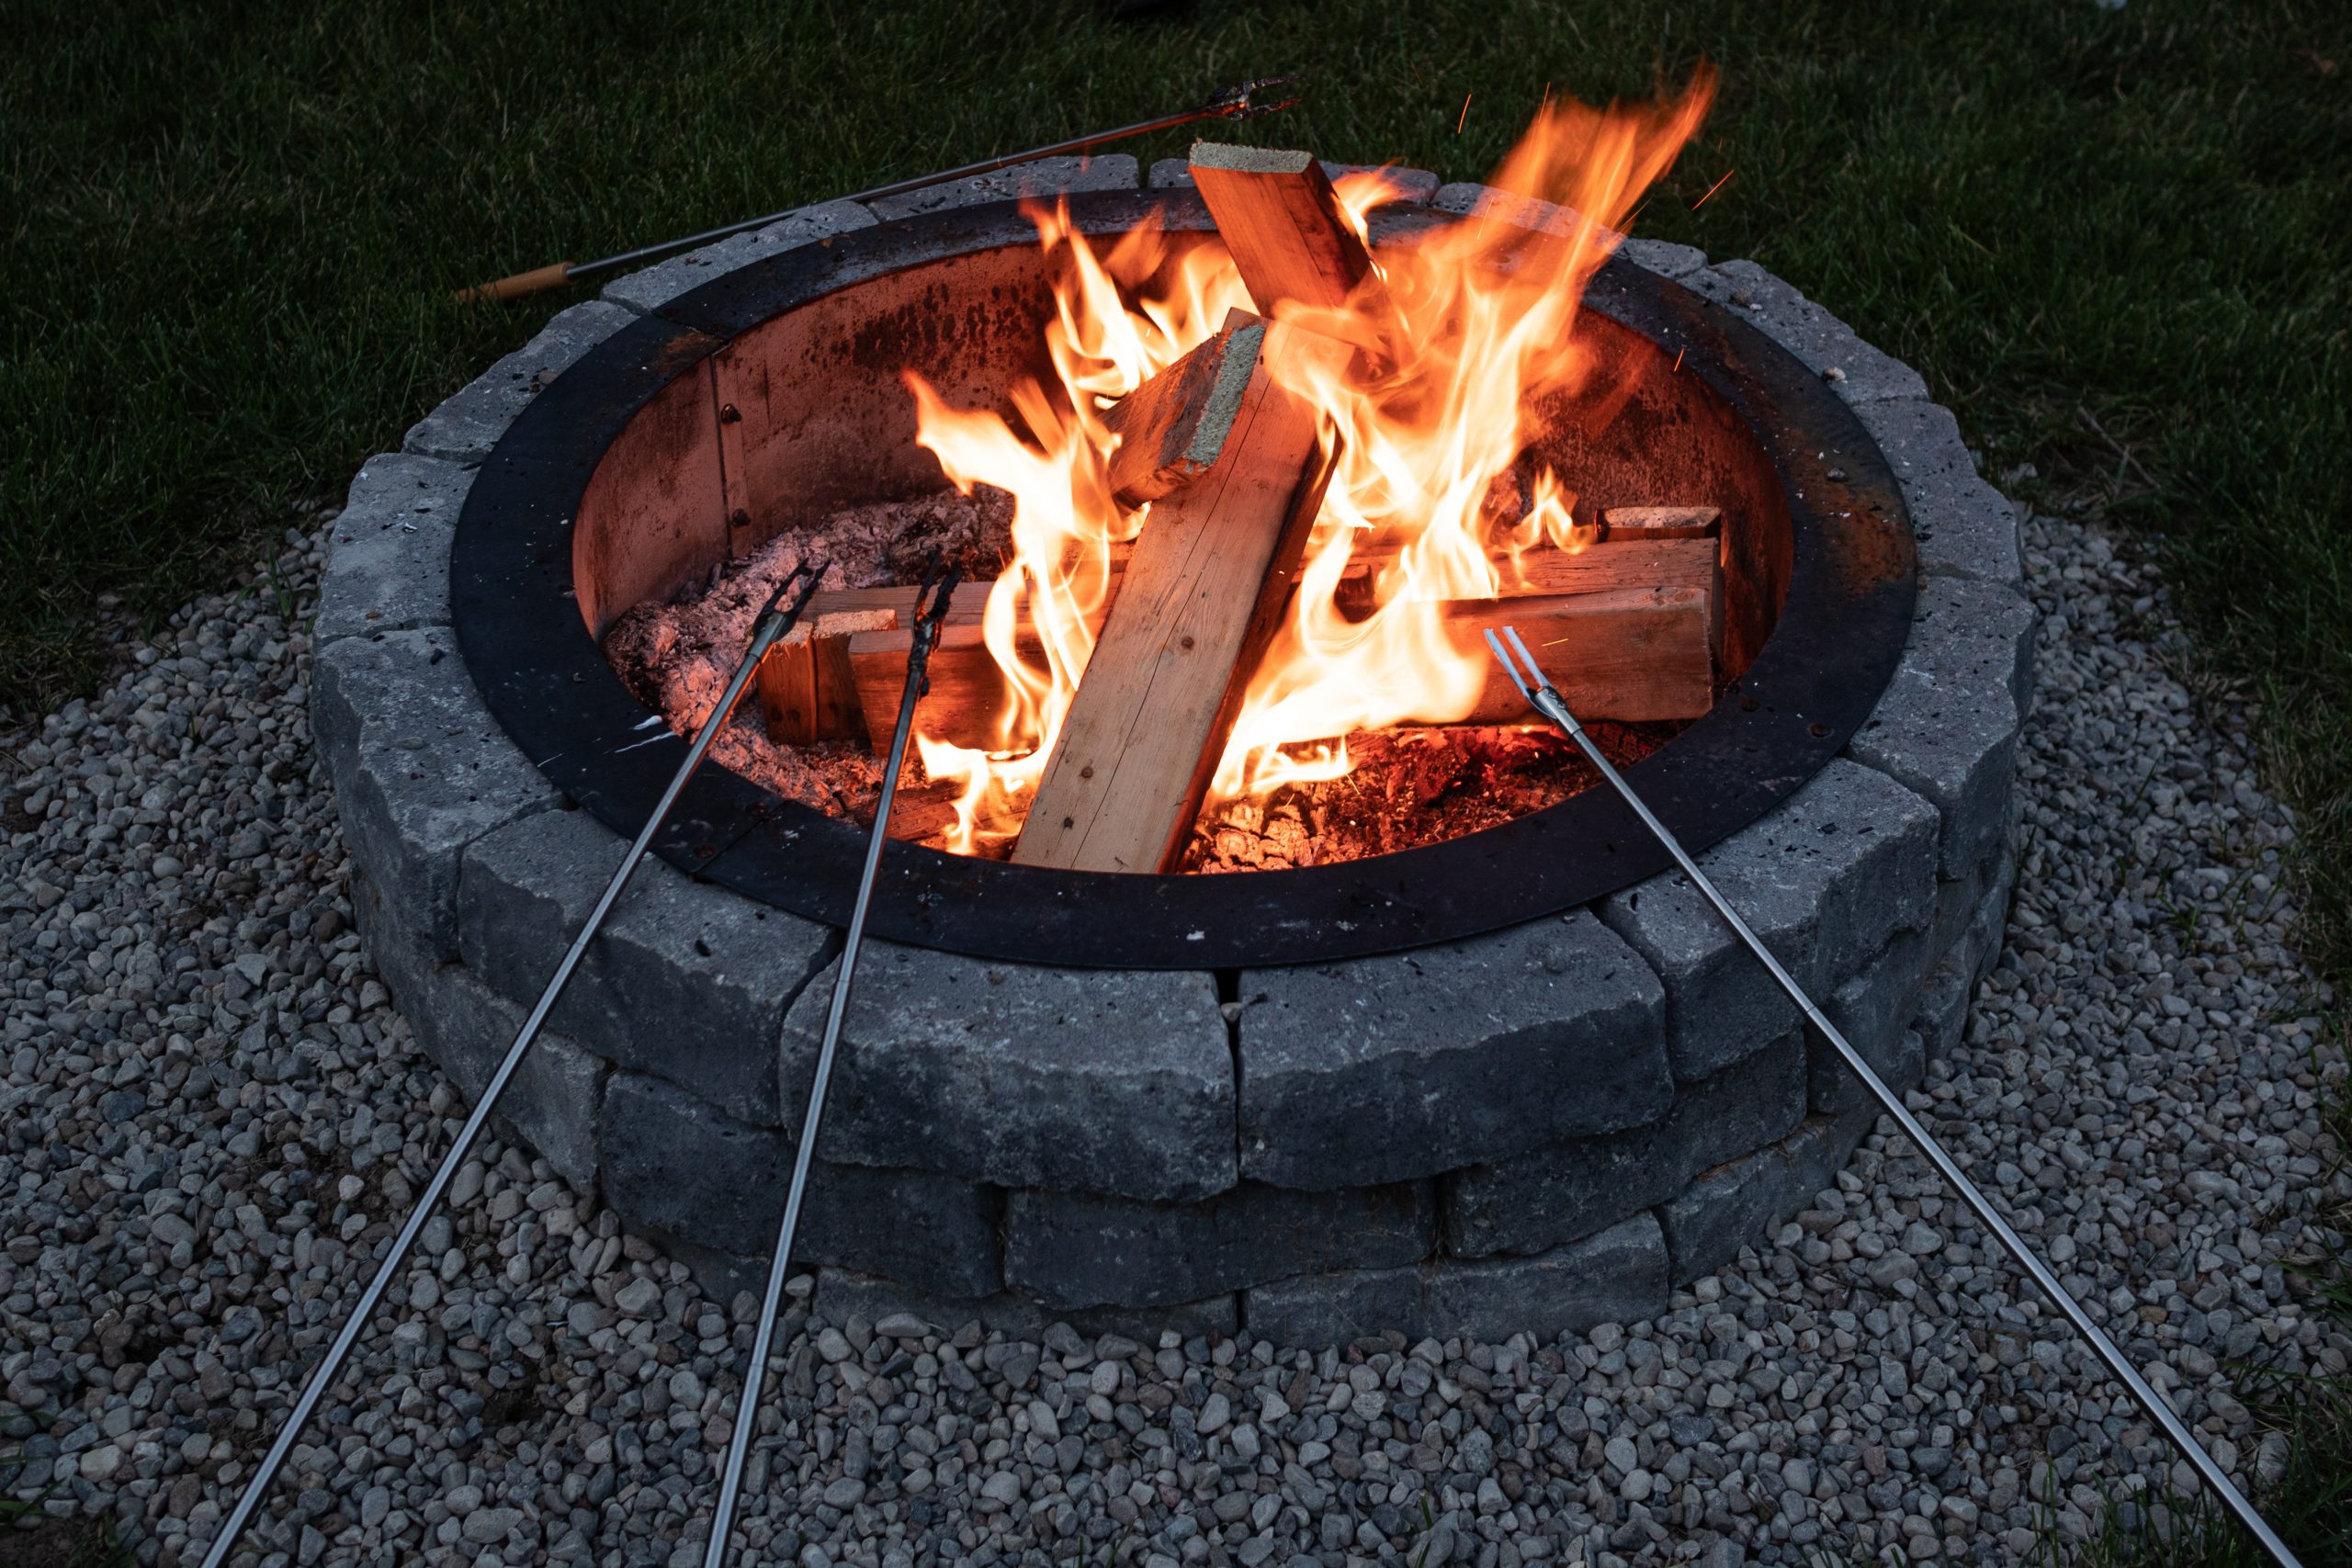 wall block fire pit with people roasting hot dogs over it